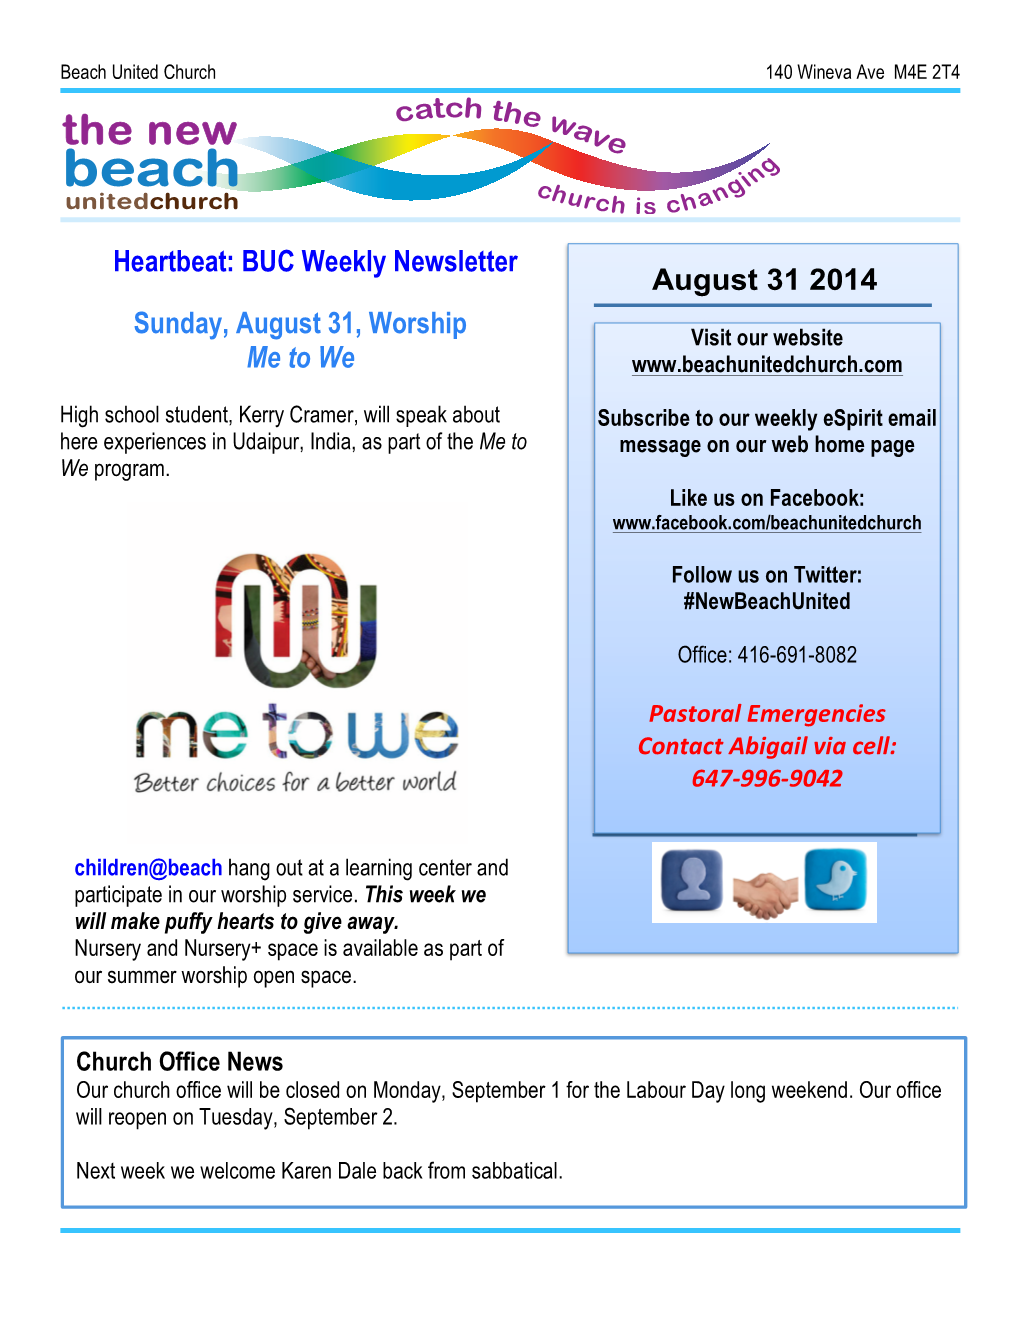 Heartbeat: BUC Weekly Newsletter Sunday, August 31, Worship Me to We